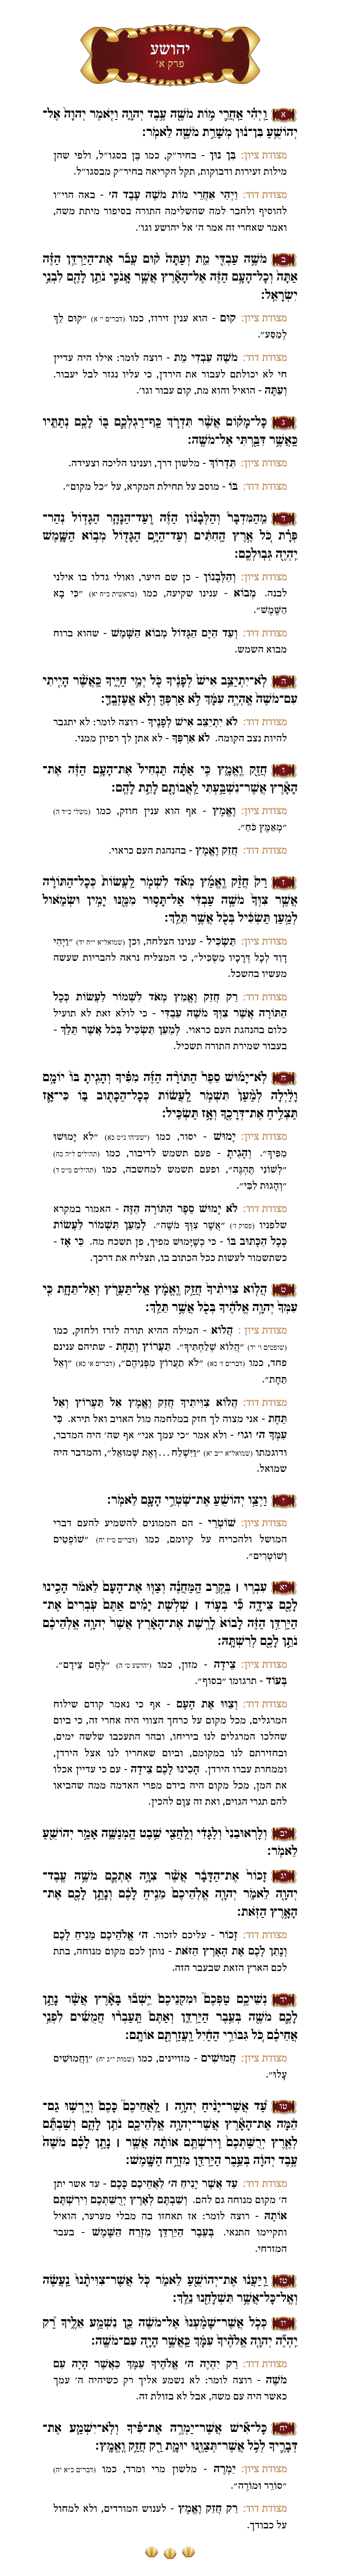 Sefer Yehoshua Chapter 1 with commentary